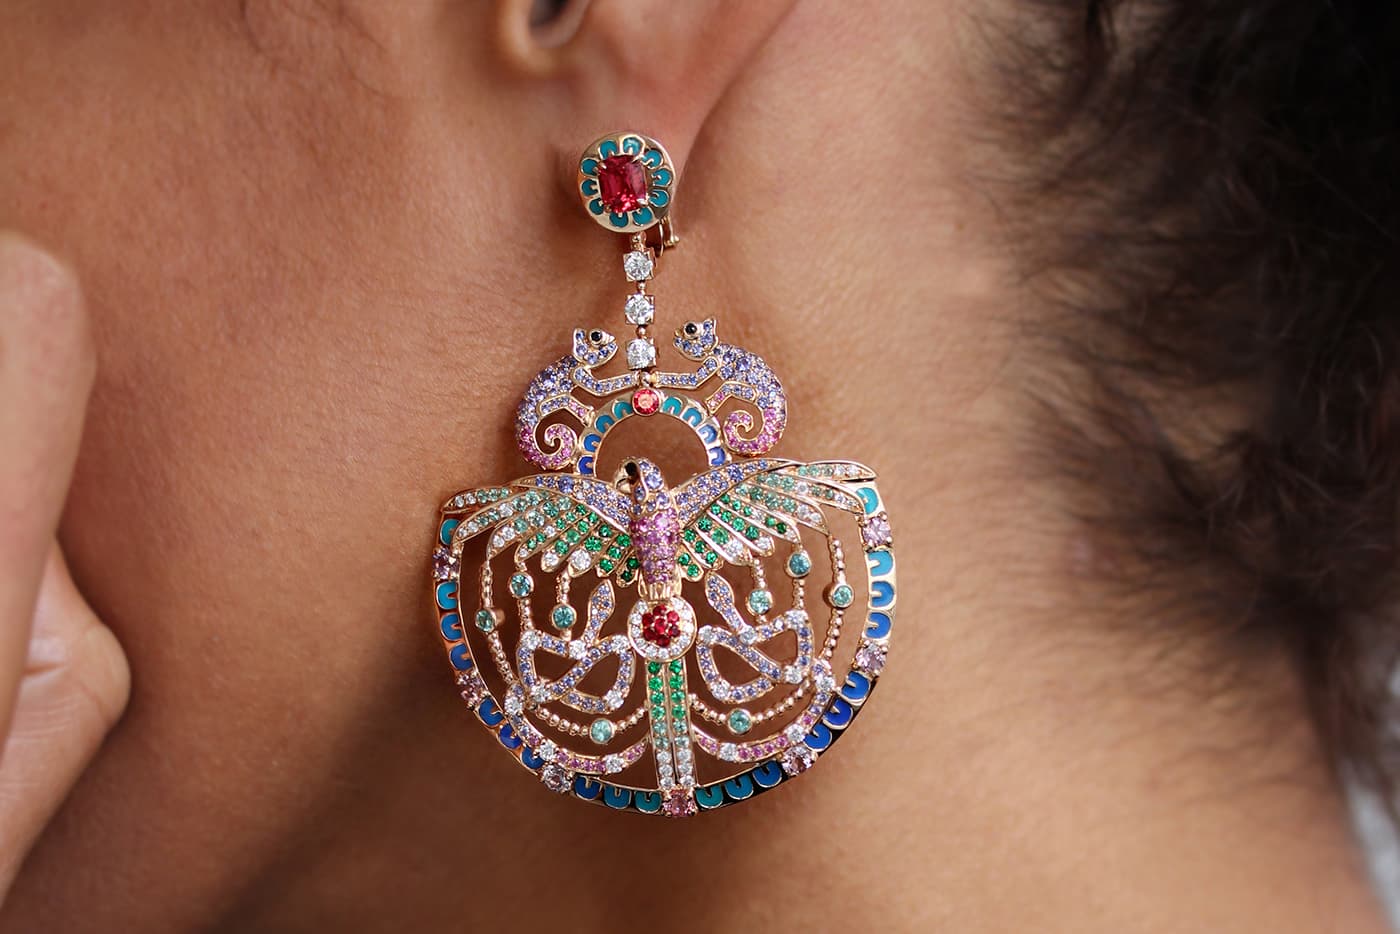 Aude Mathon x Émeline Piot 'Unique'collection ‘Quetzal’ earrings with spinels, tourmaline, sapphires, diamonds and emeralds in enamel and yellow gold